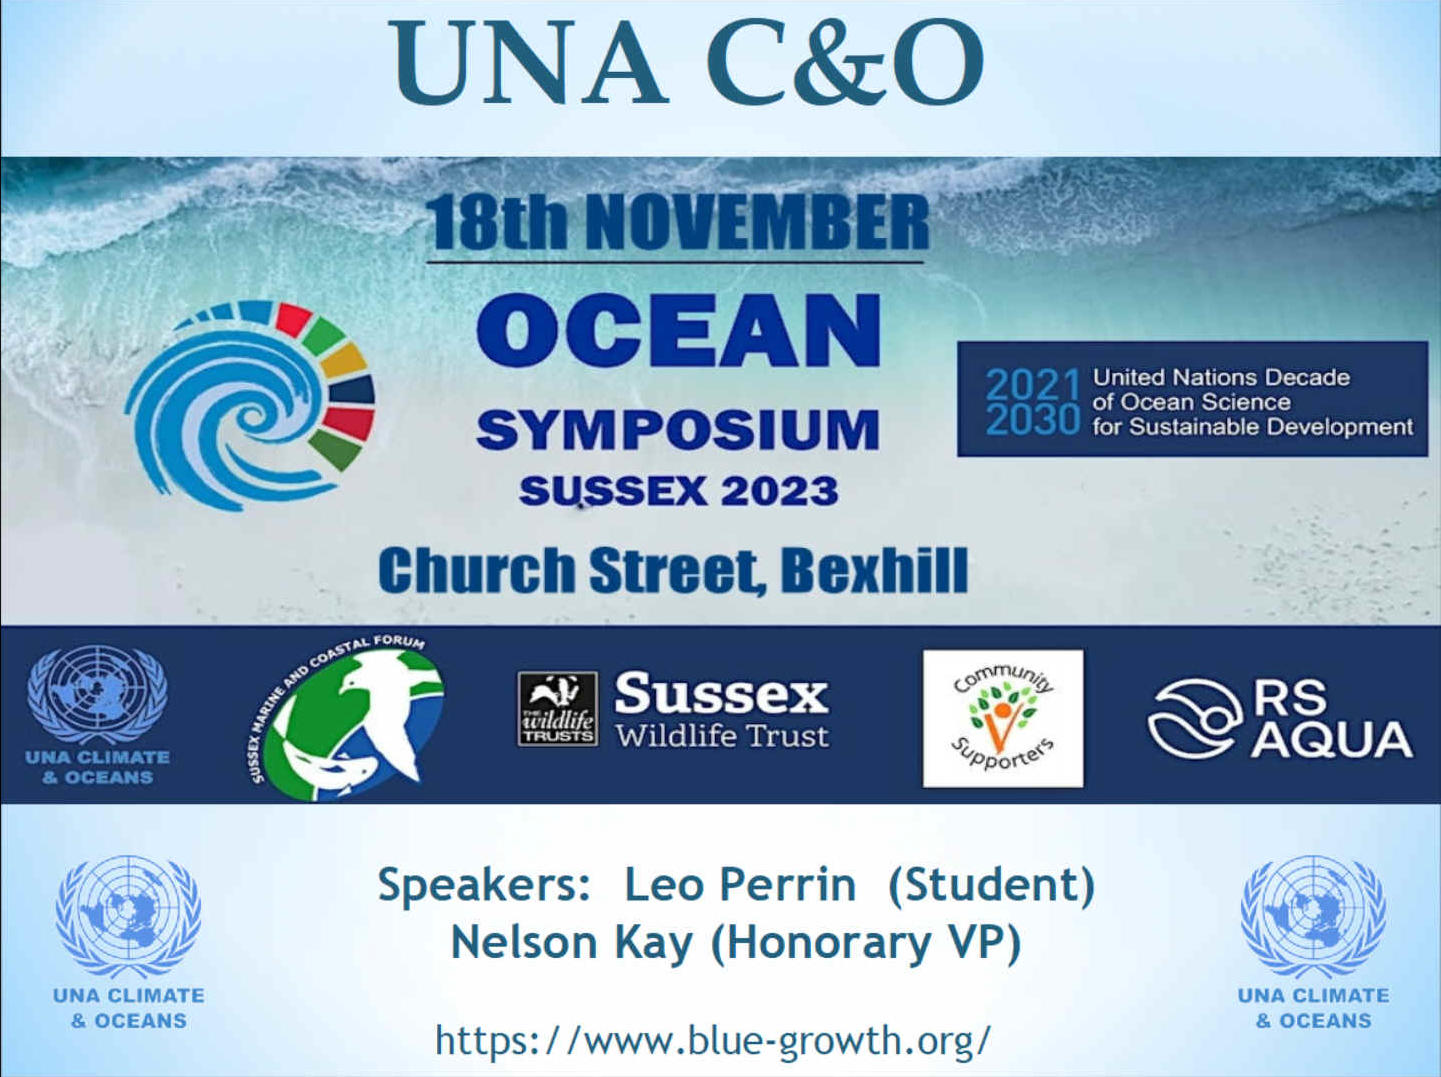 Leo Perrin is a student (volunteer) with the Cleaner Ocean Foundation. He will be presenting as a speaker at this prestigious event in Bexhill, on the 18th November 2003. He is mentored by Nelson Kay, (honorary VP).